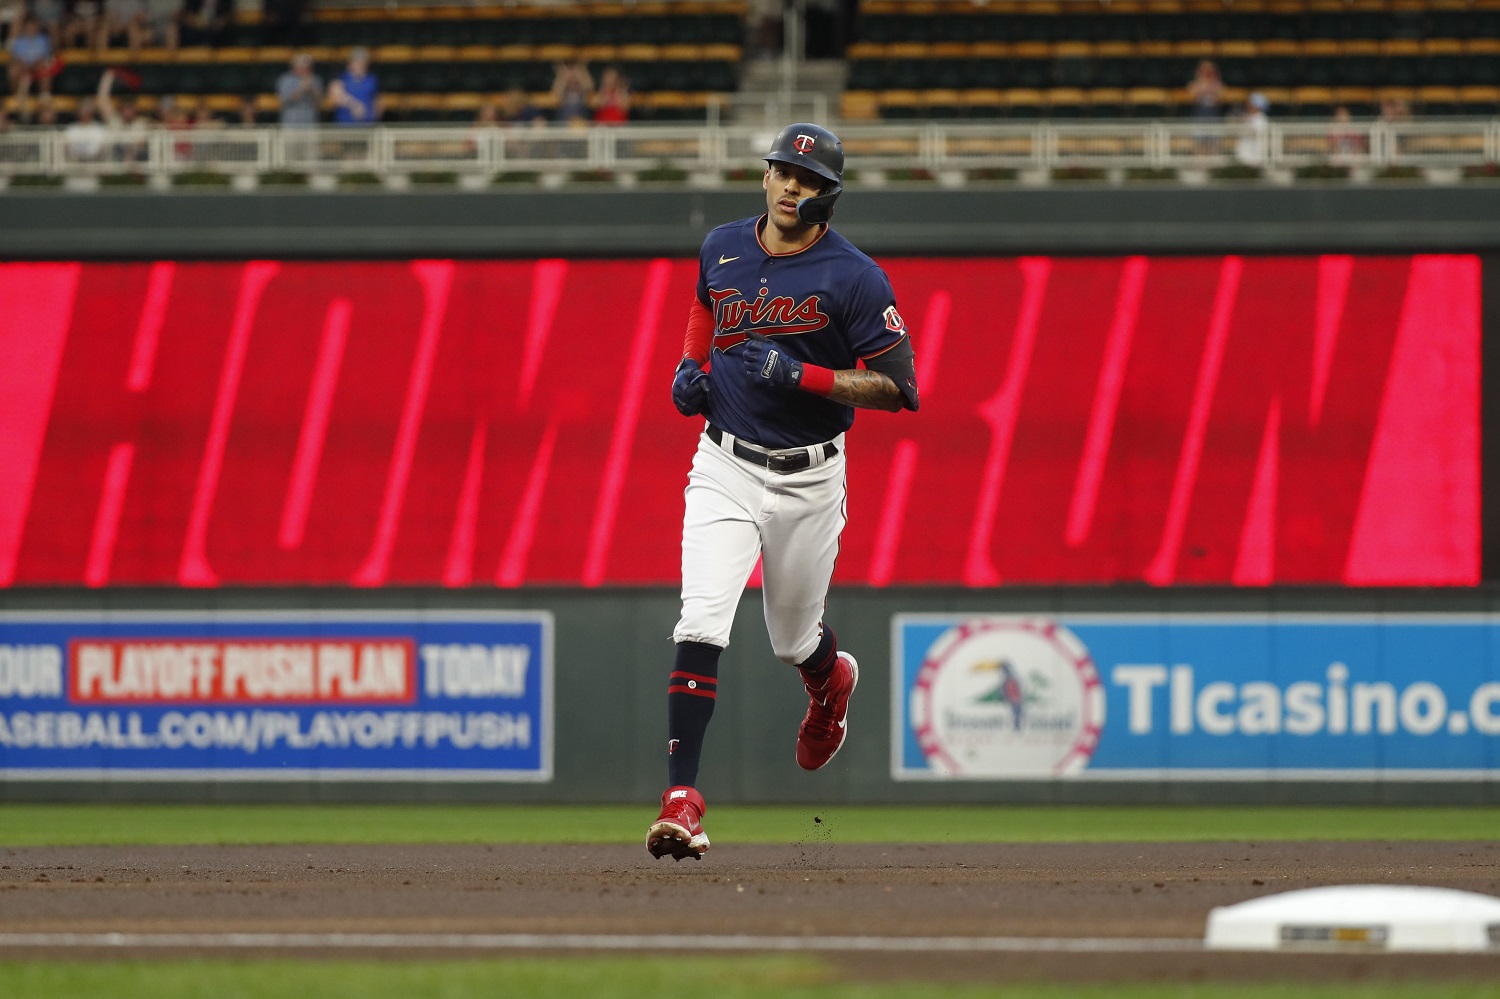 In Carlos Correa deal, Twins went where Giants and Mets wouldn't